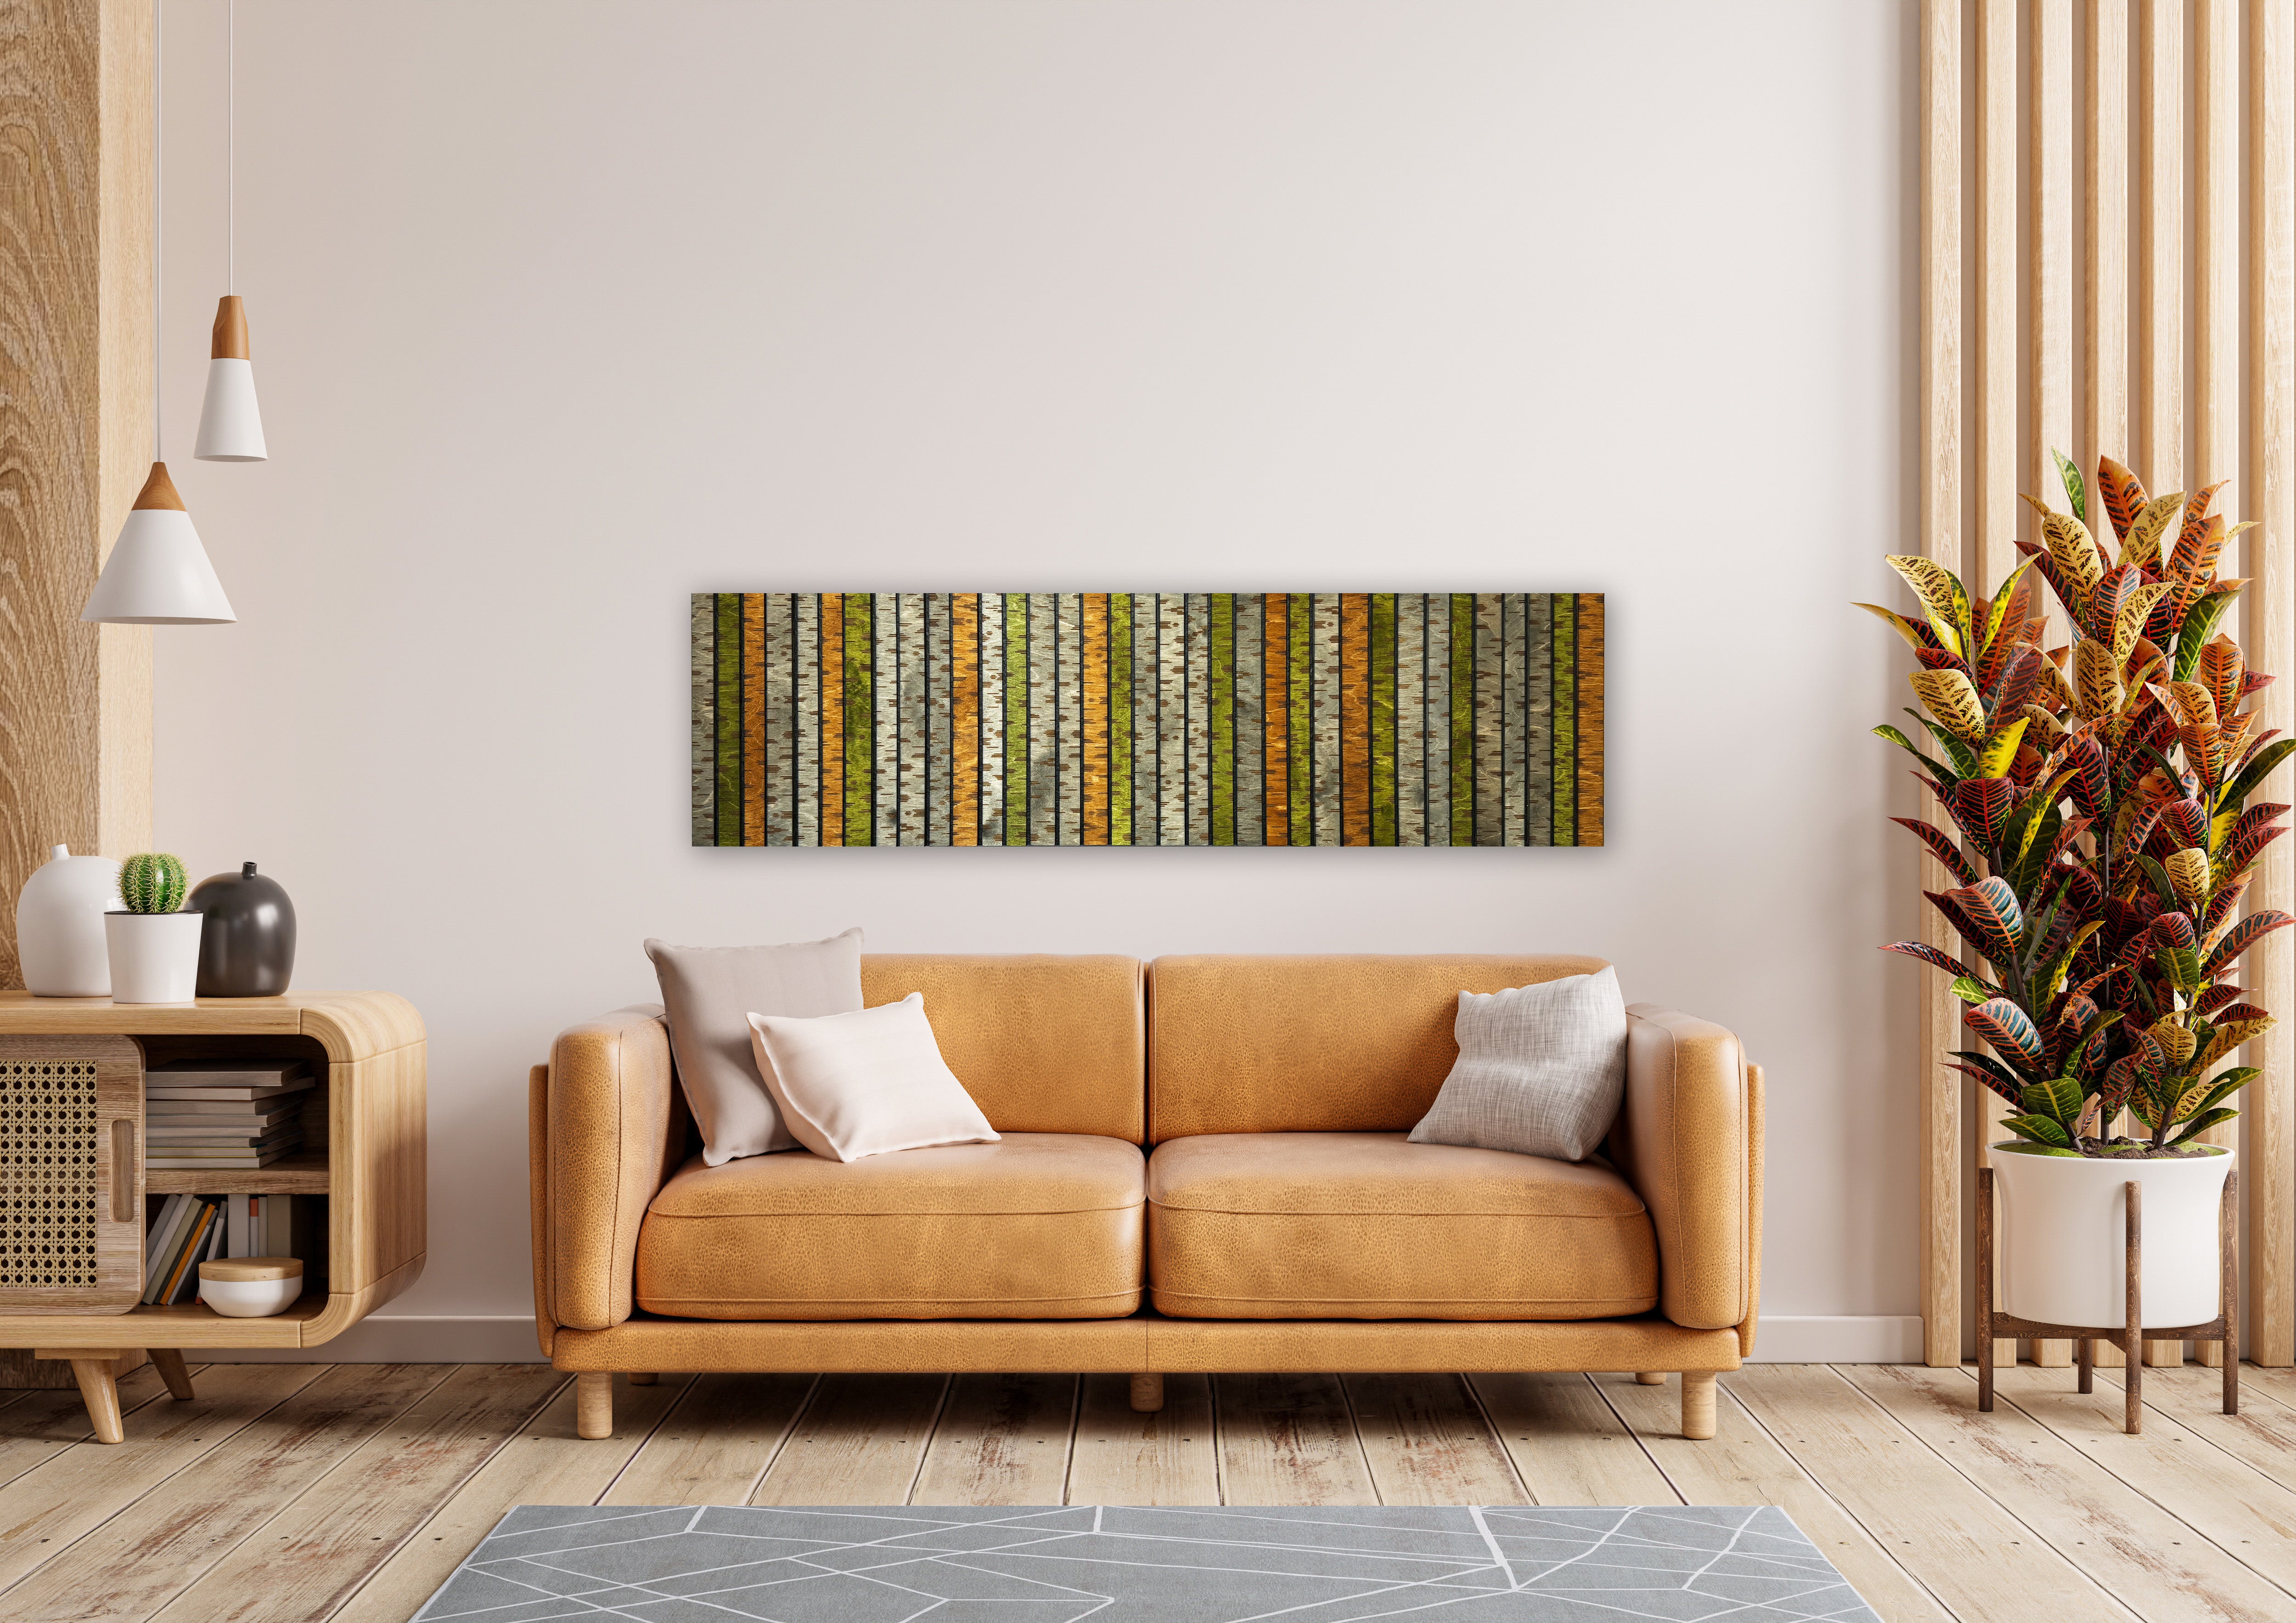 Custom baltic birch wall art shown in a living room setting. The wall decor is an original design  featuring stylized birch trees in warm autumn hues